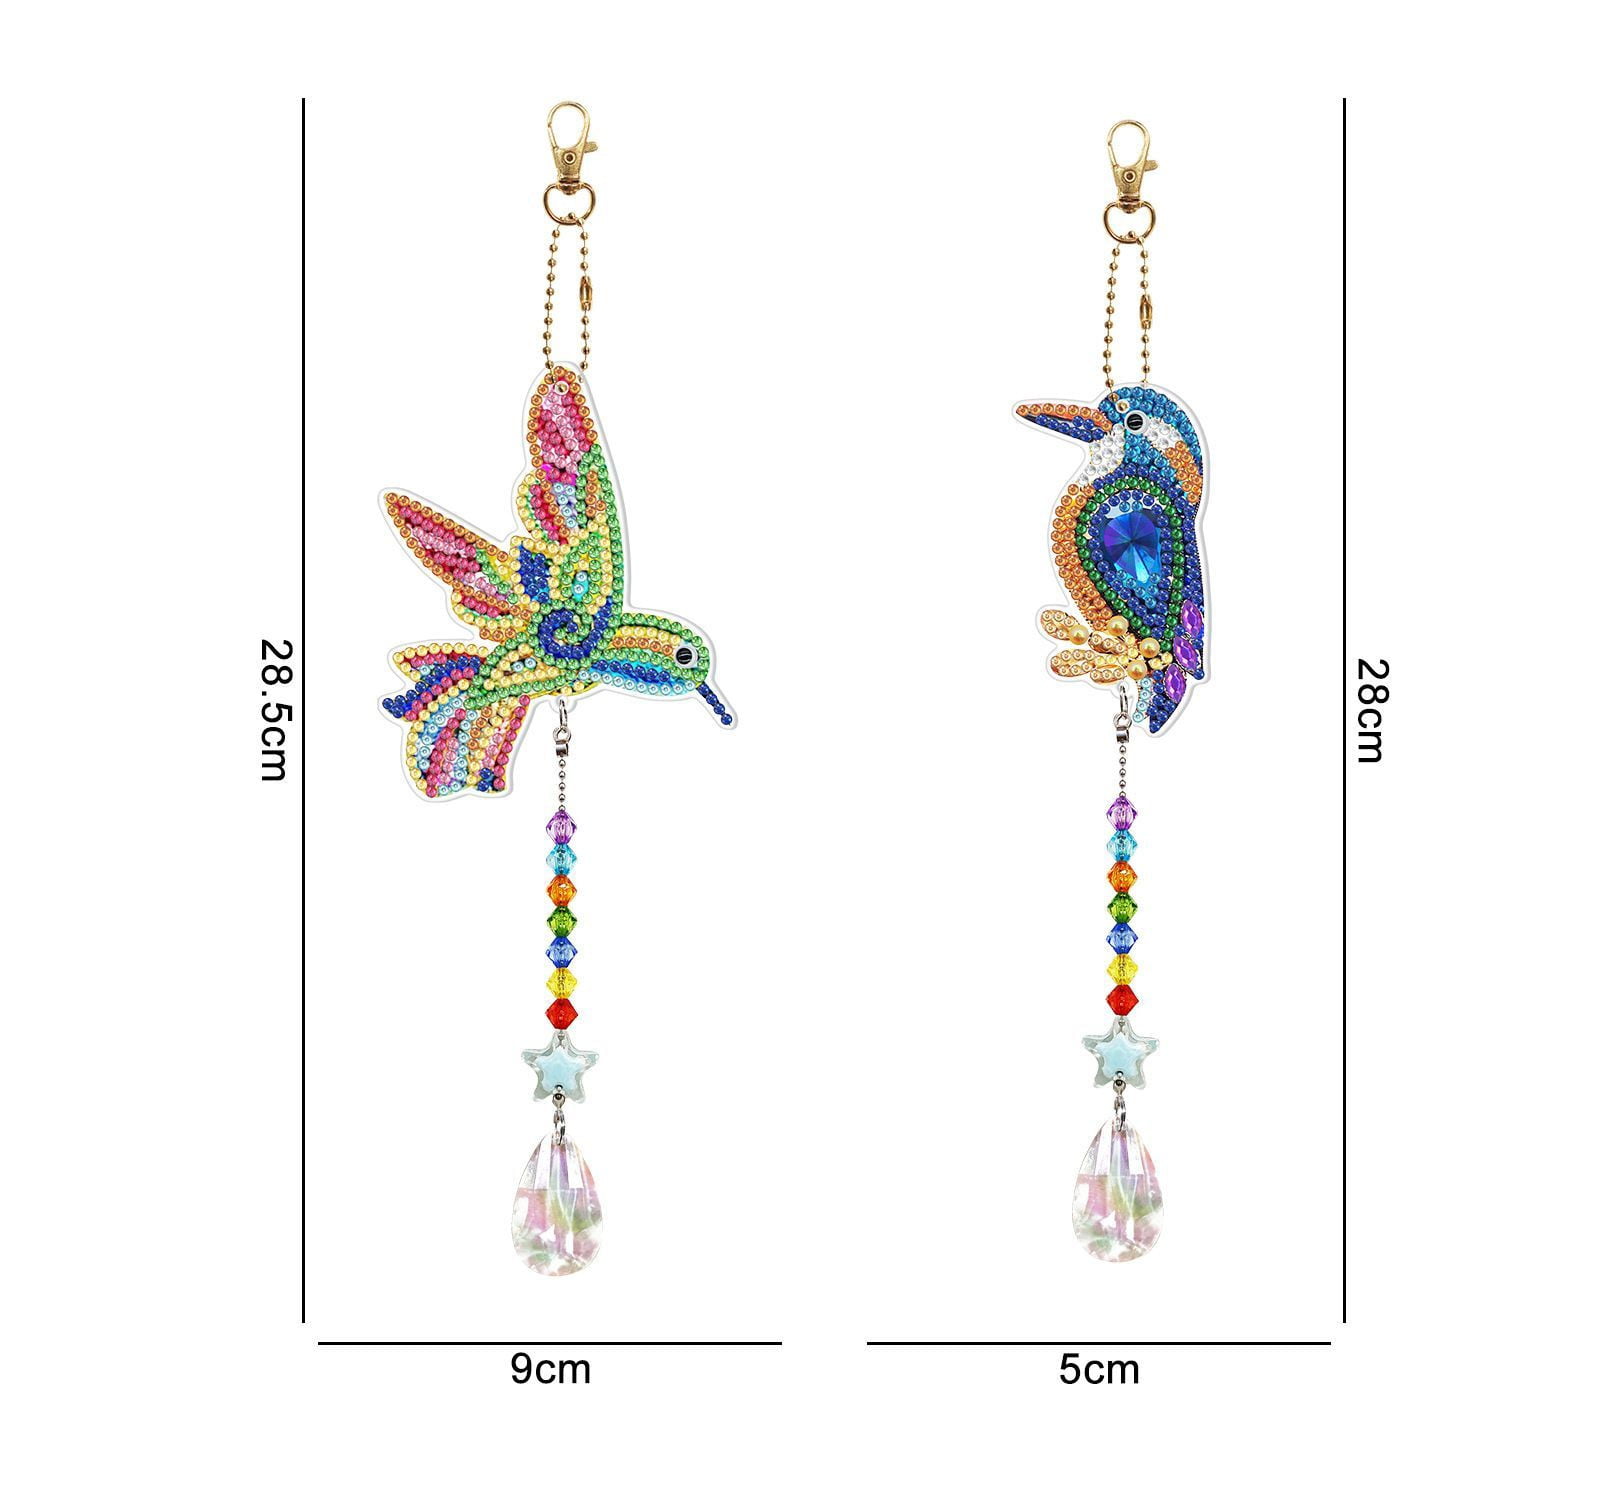 Anseal 3 Pack Diamond Art Suncatcher Wind Chime Kits for Adults Kids,  Double Sided Crystal Sea Animals Diamond Painting Hanging Ornament  Suncatchers Kits for Window Home Garden - Yahoo Shopping